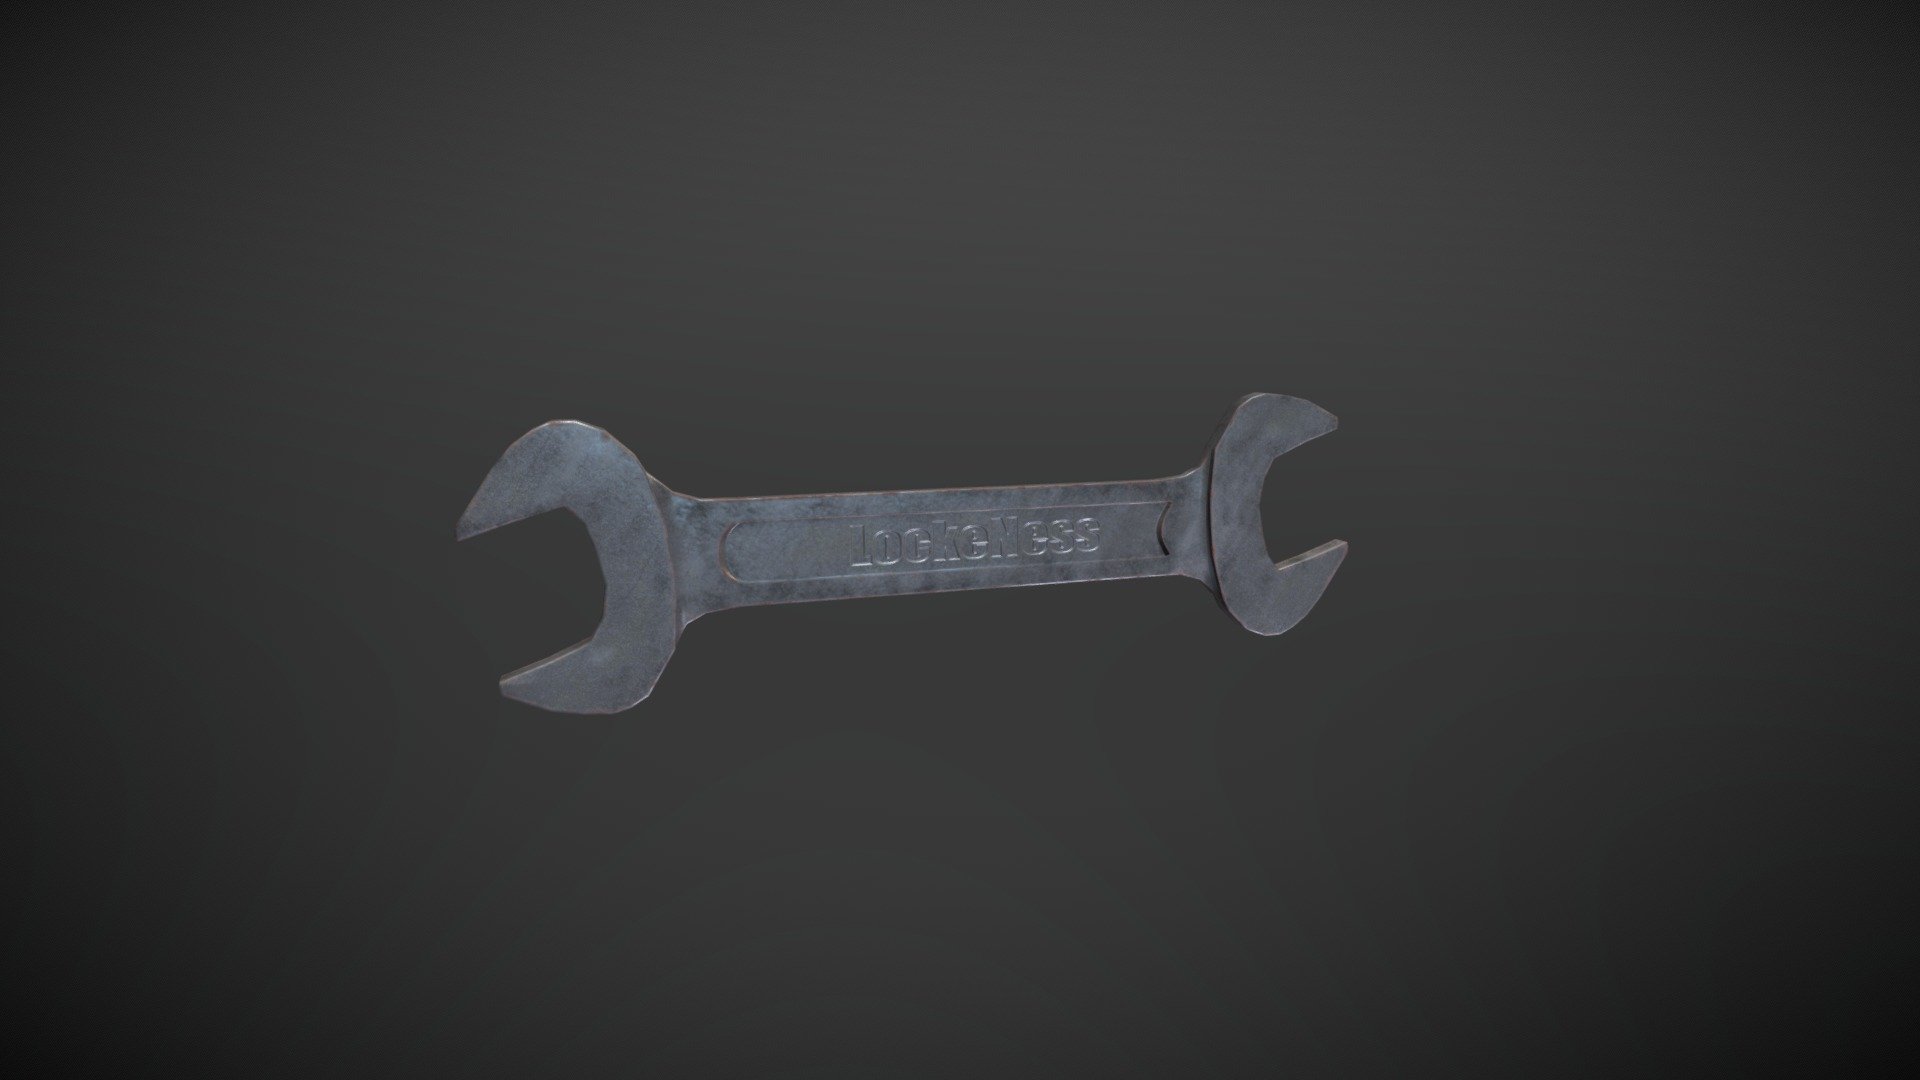 First model posted here low poly weathered spanner/wrench - Weathered Spanner wrench - 3D model by Lockeness 3d model